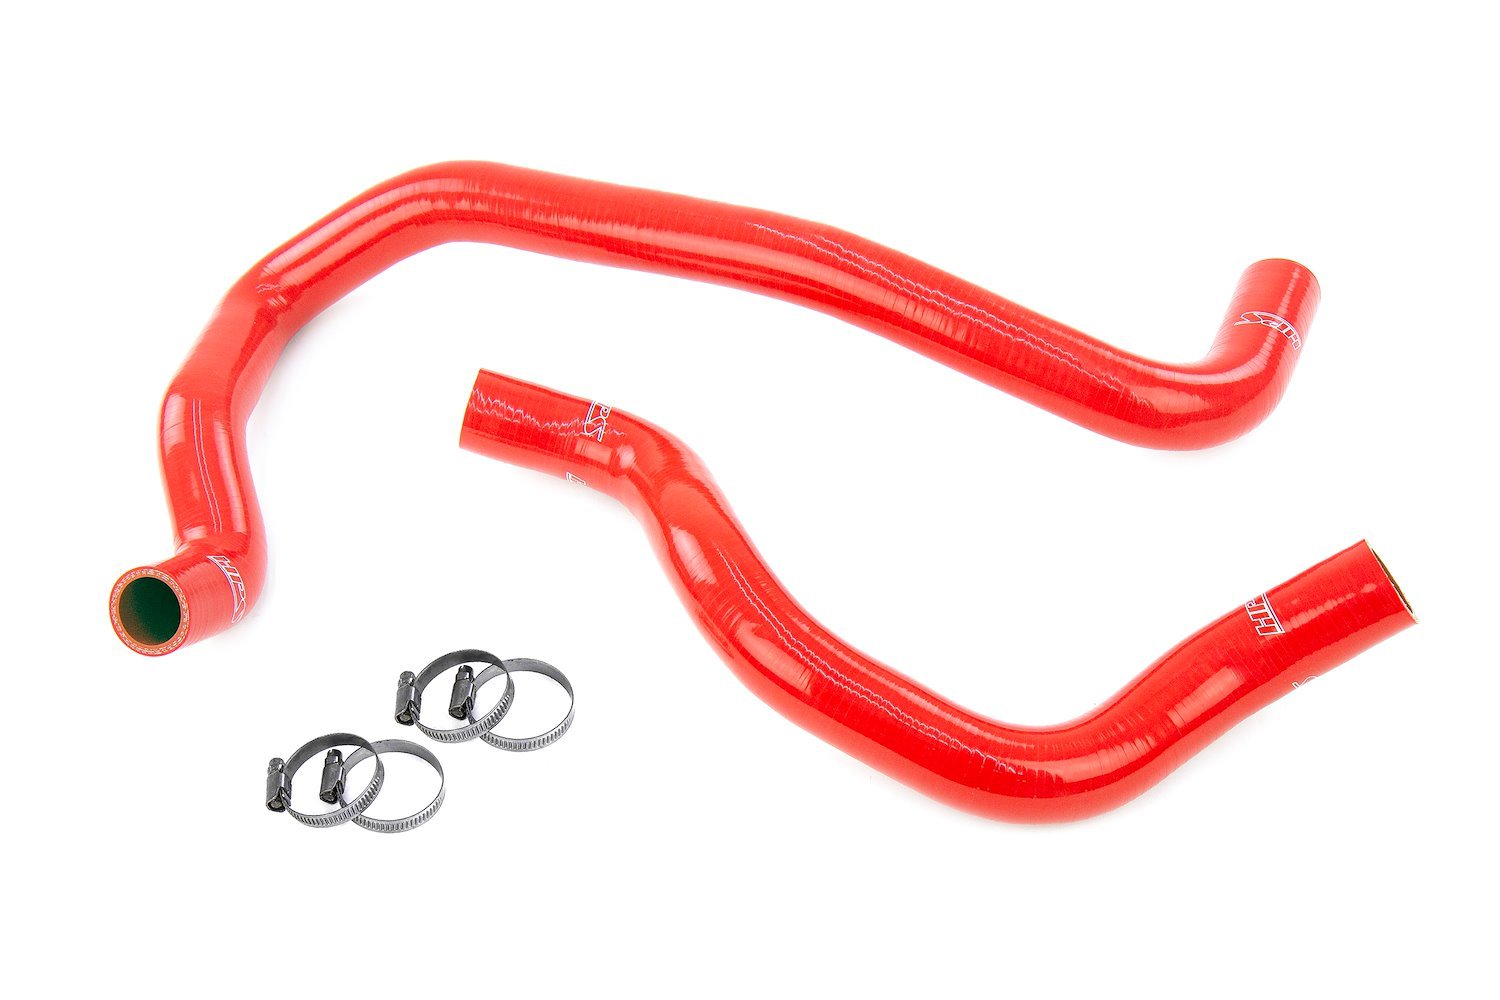 57-2048-RED Radiator Hose Kit, 3-Ply Reinforced Silicone, Replaces Rubber Radiator Coolant Hoses